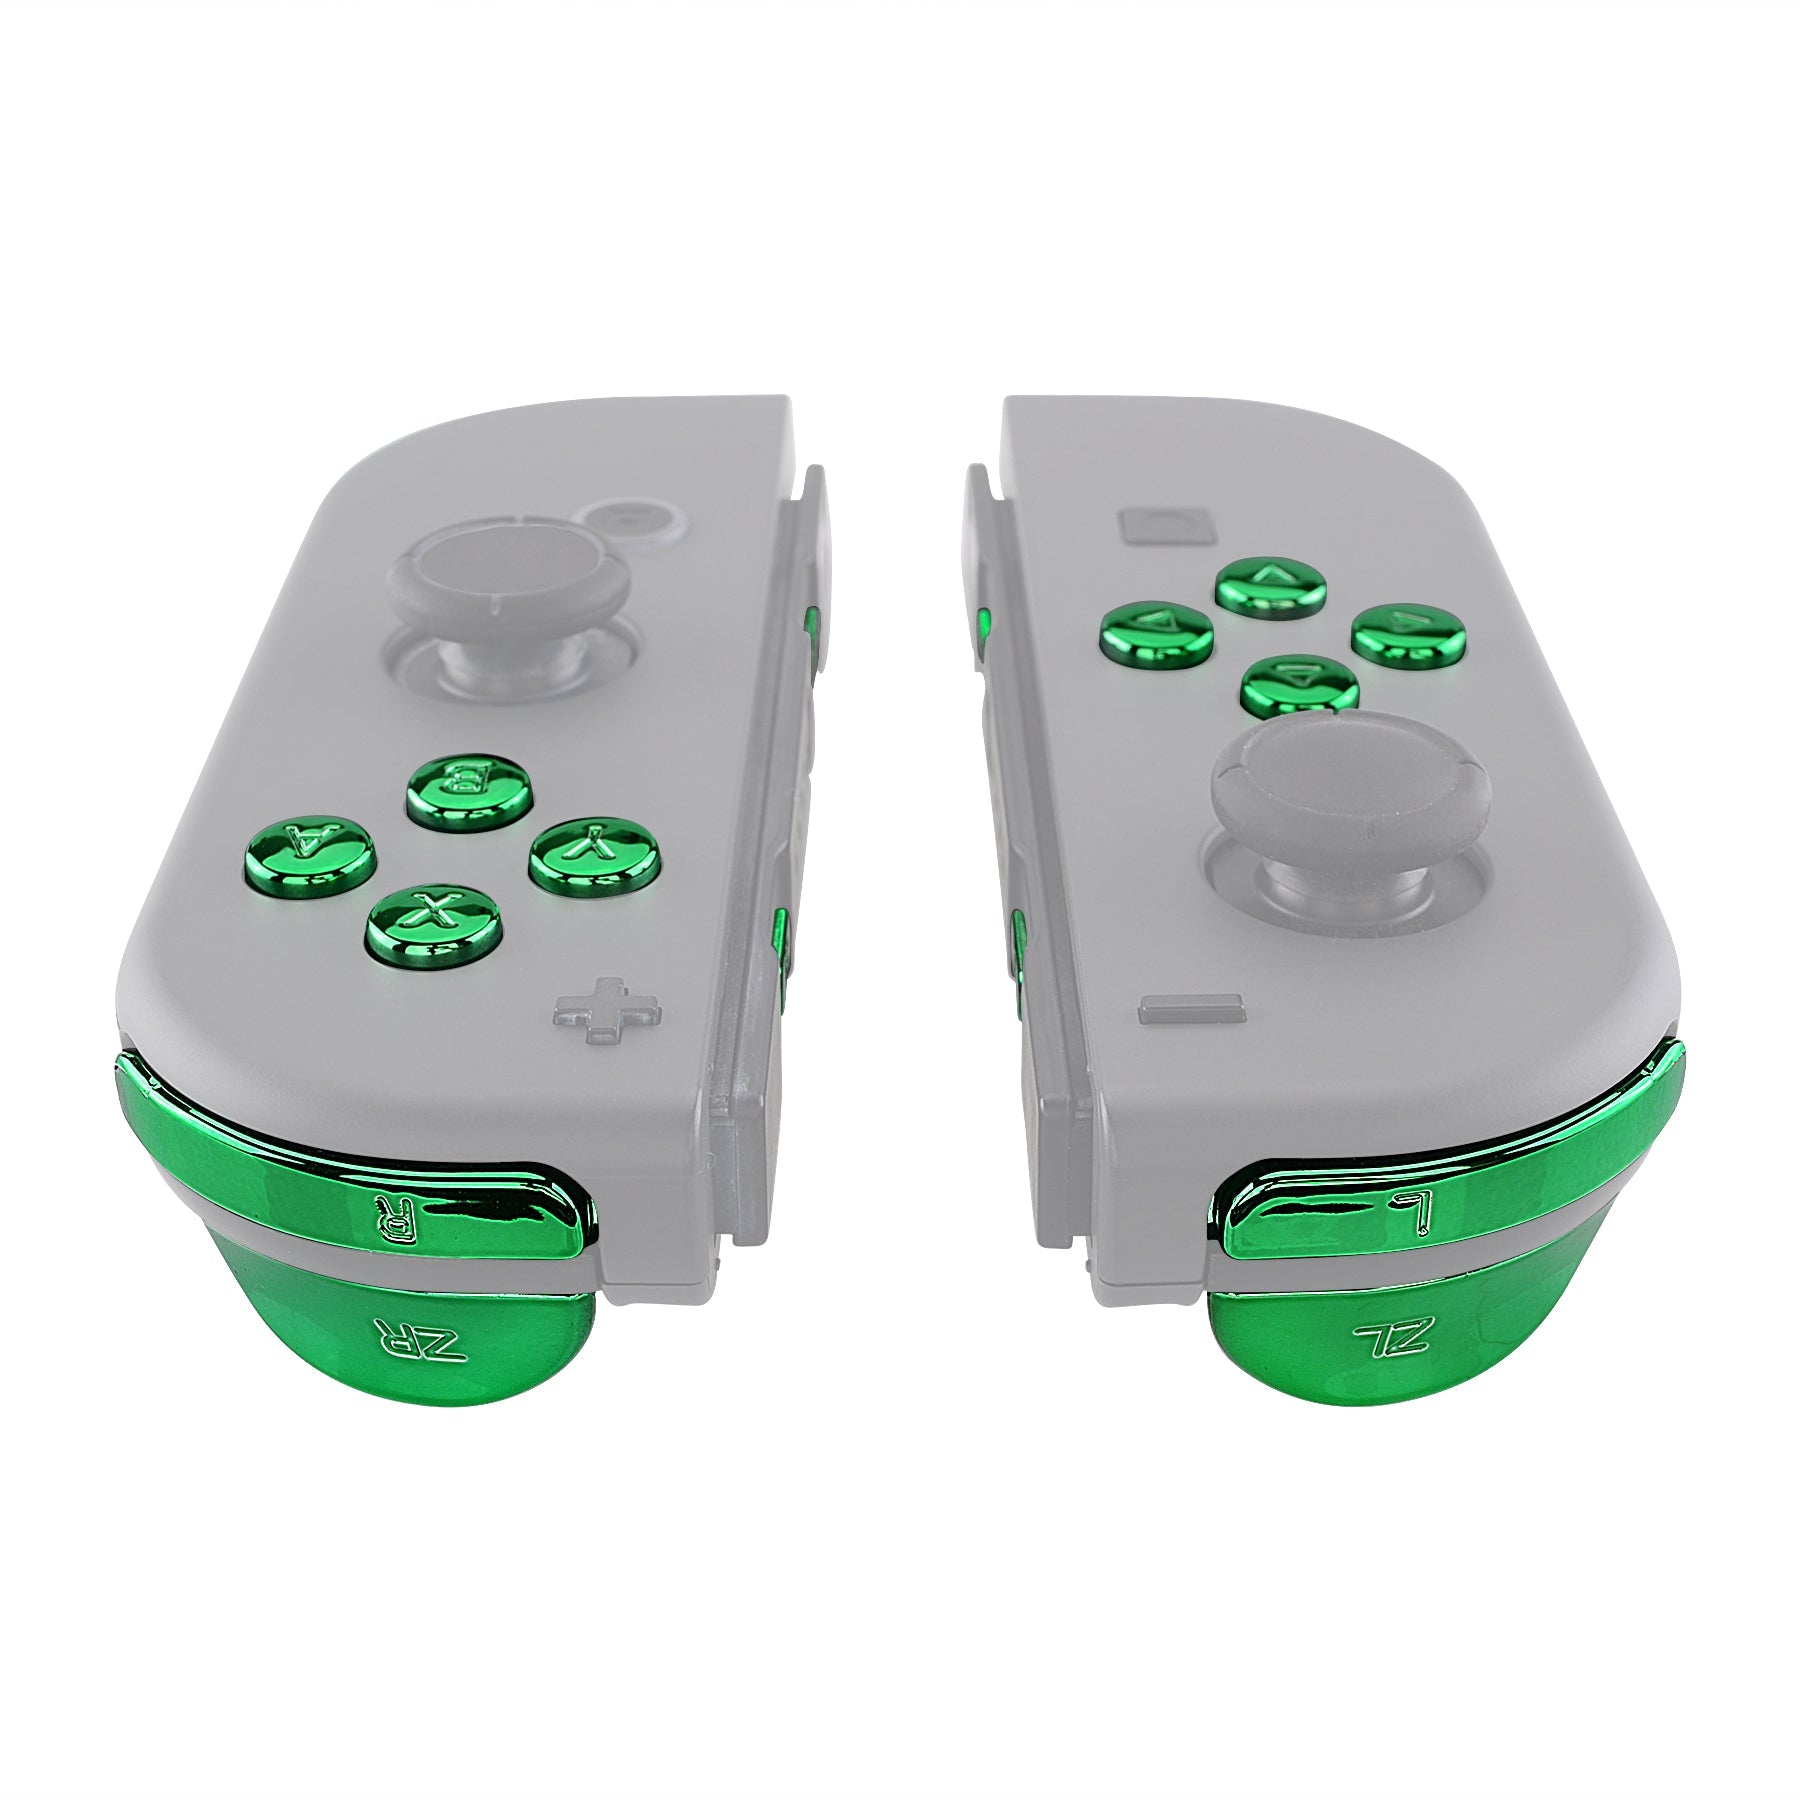 eXtremeRate Retail Chrome Green Glossy Replacement ABXY Direction Keys SR SL L R ZR ZL Trigger Buttons Springs, Full Set Buttons Fix Kits with Tools for NS Switch JoyCon & OLED JoyCon - JoyCon Shell NOT Included - AJ306